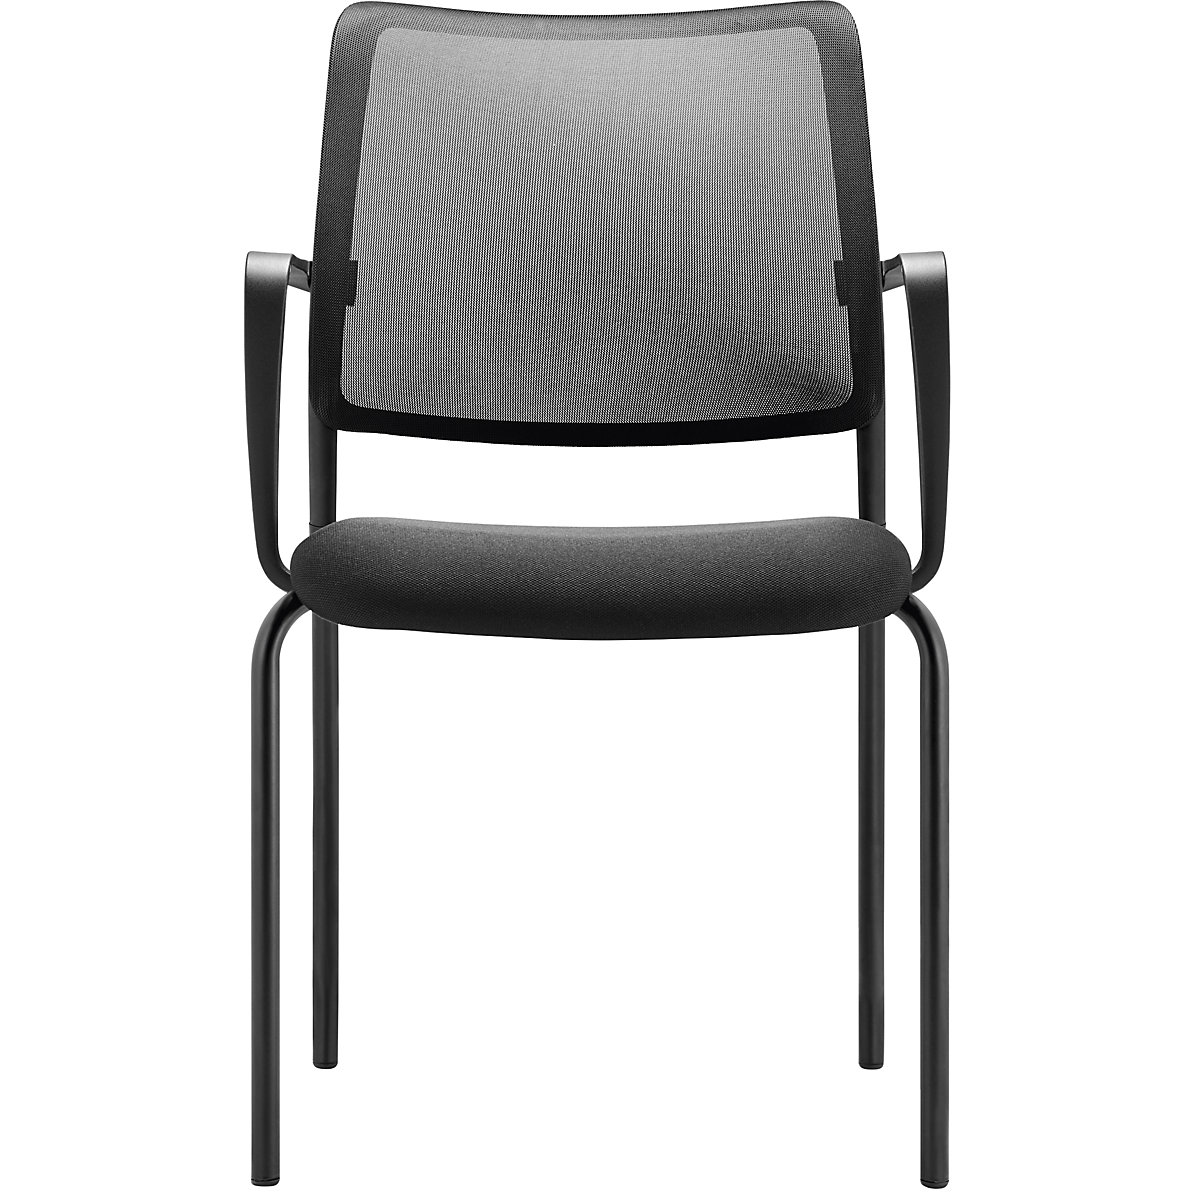 TO-SYNC meet meeting room chair – TrendOffice, with mesh back rest, pack of 4, black, with arm rests-2